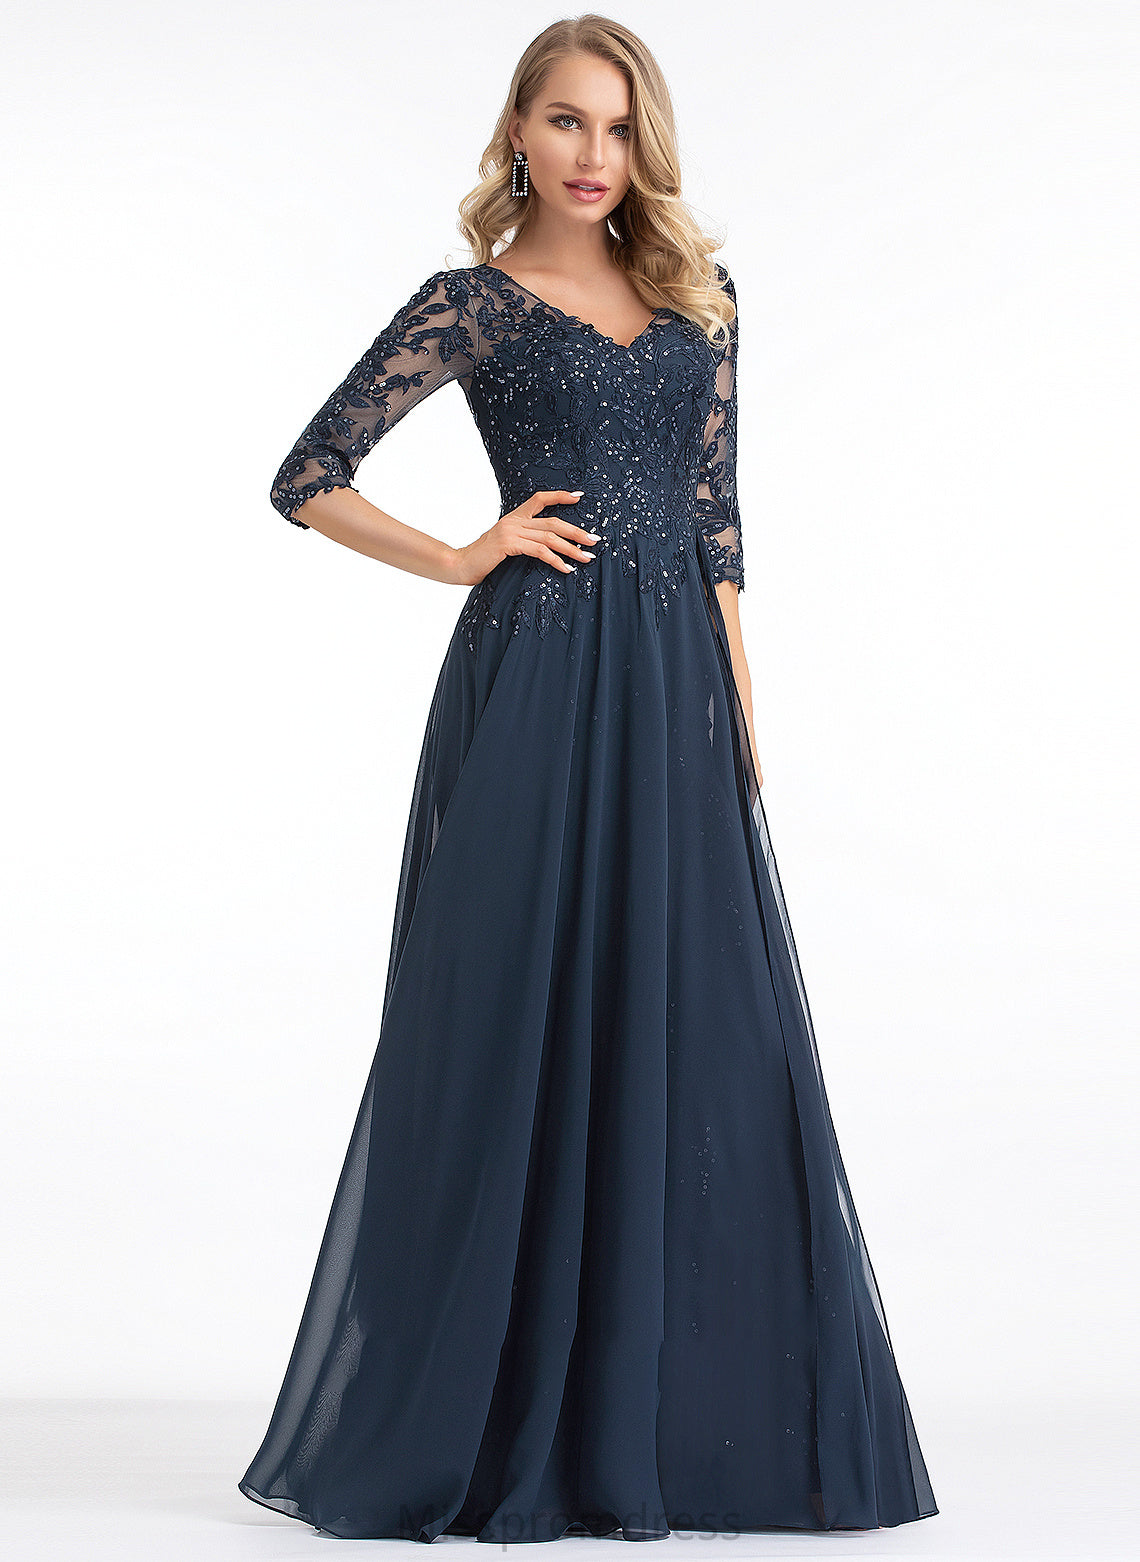 With Armani Prom Dresses Chiffon A-Line Floor-Length Sequins V-neck